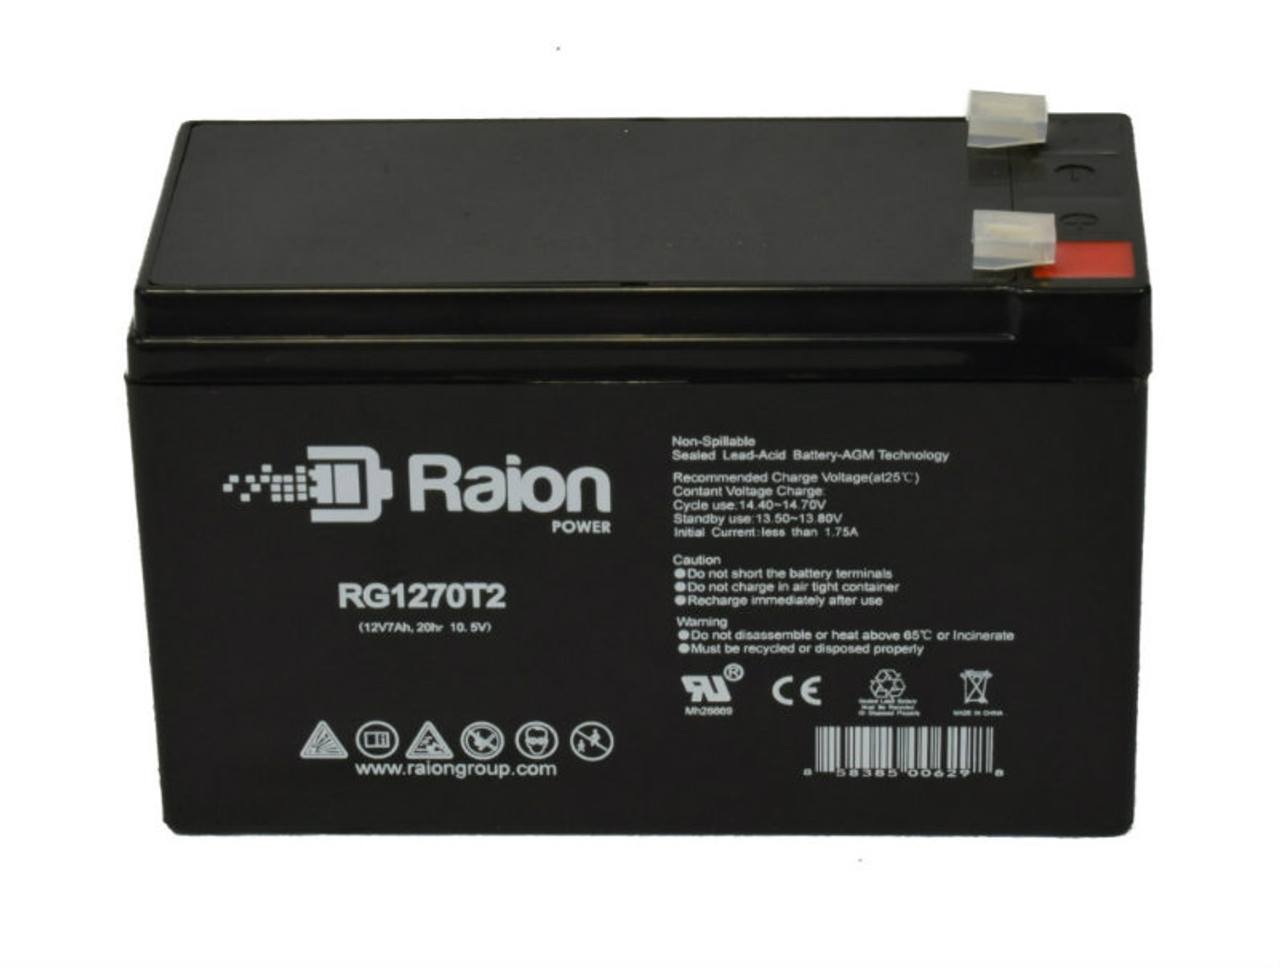 Raion Power RG1270T1 12V 7Ah Lead Acid Battery for CooPower CP12-7.0 F1